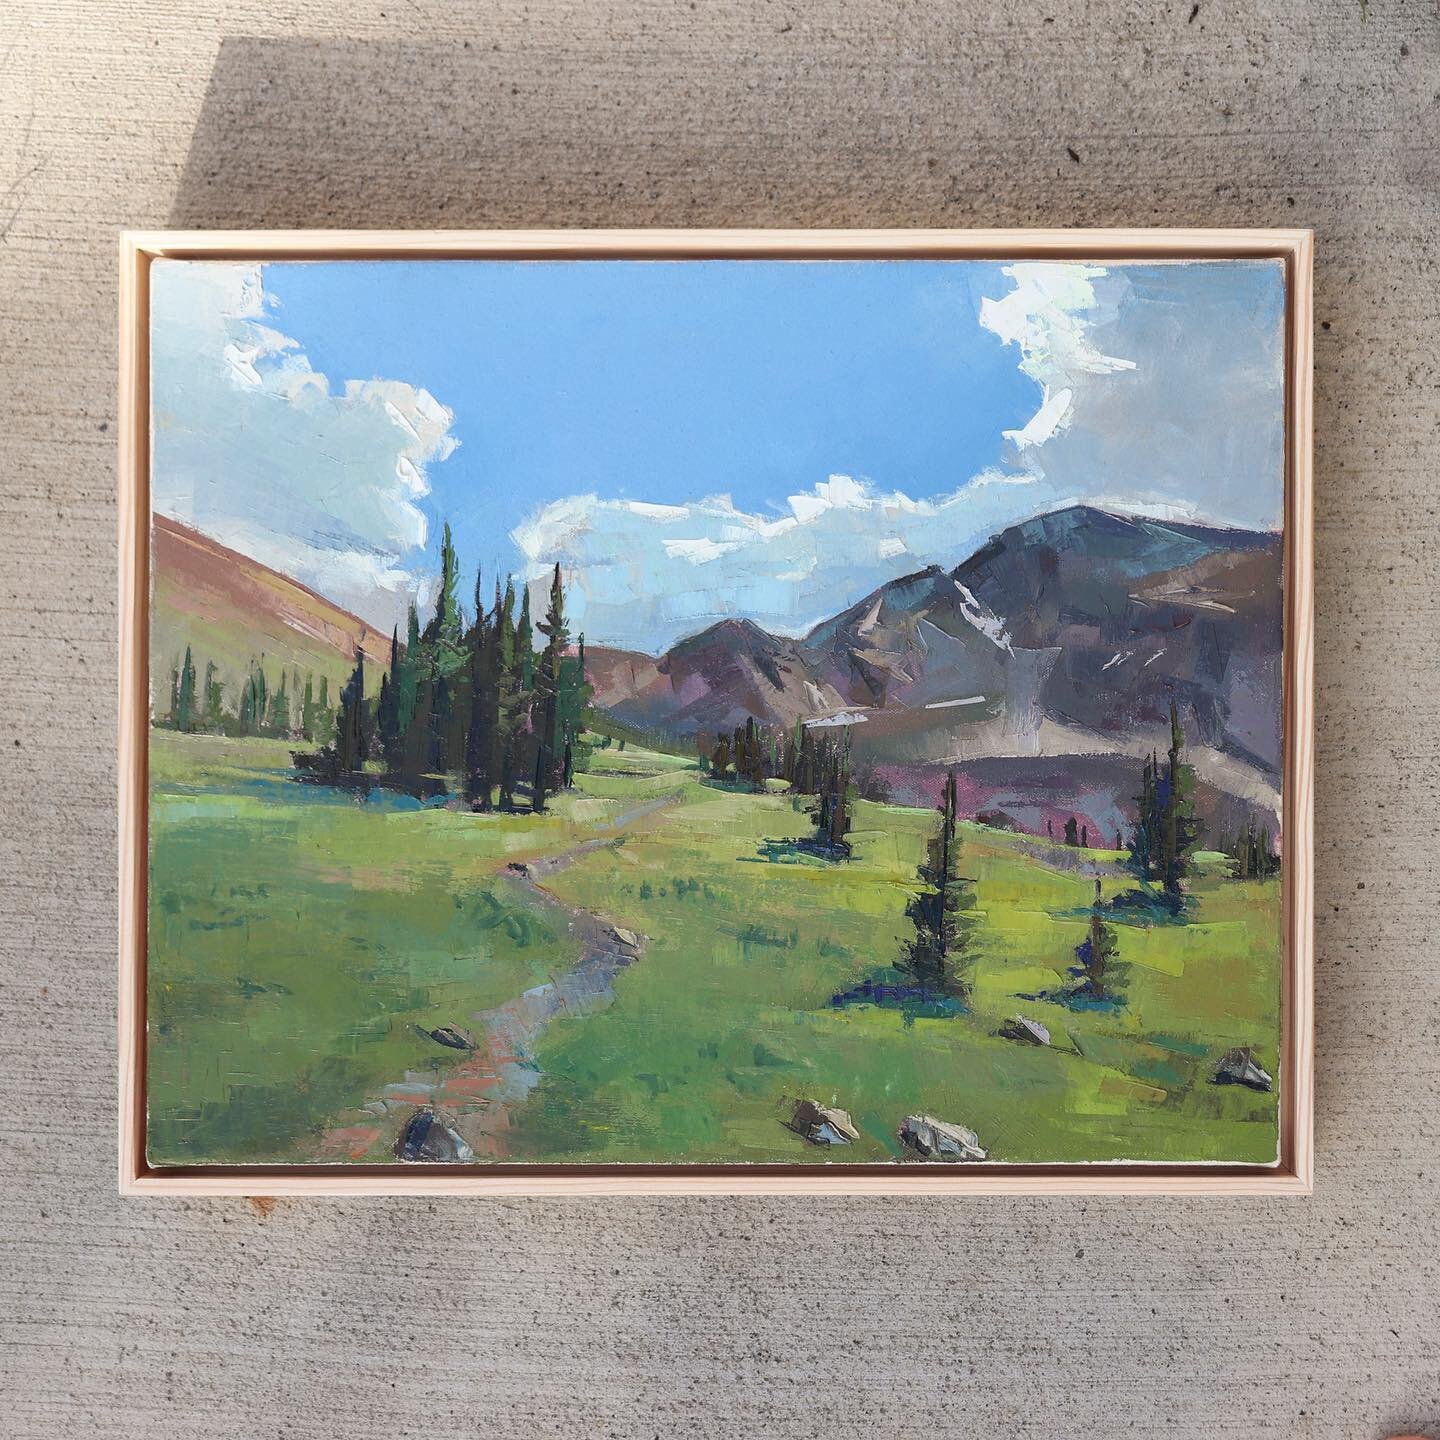 This commission gets me so excited for summer on the trails 🤠

#summer #sky #trail #hiking #art #artiststudio #artistsoninstagram #artwork #artofinstagram #artist #artoftheday #artcollector #artlover #oilpaint #oilpainting #colorado #contemporarypai